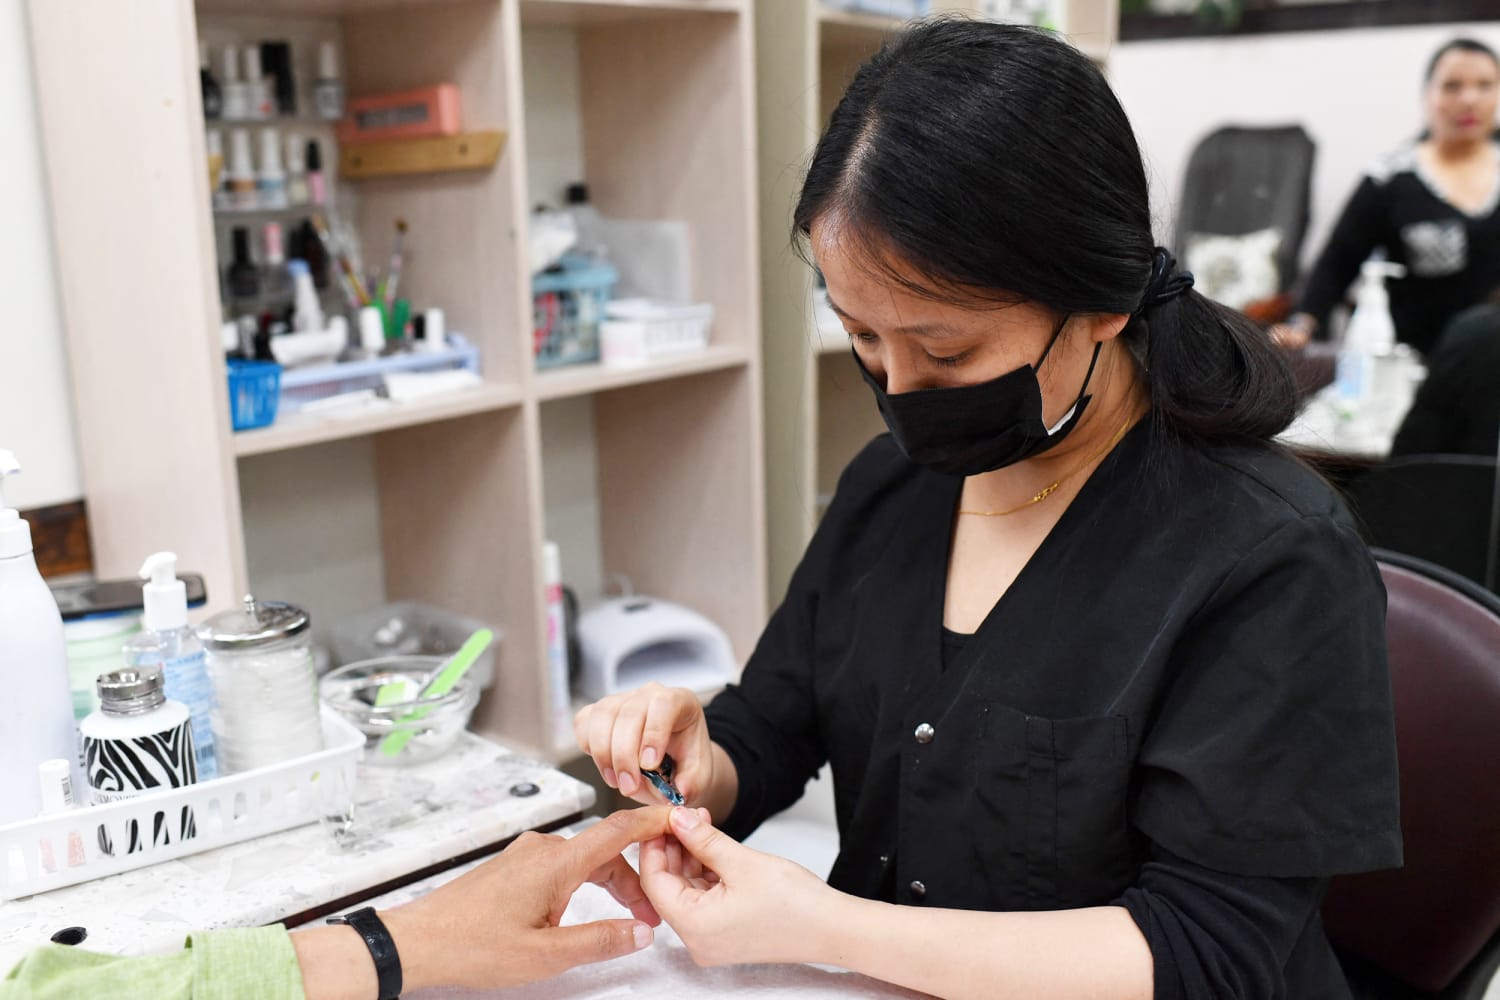 Nail technicians demand safer working conditions and steadier pay as Covid  aggravates risks